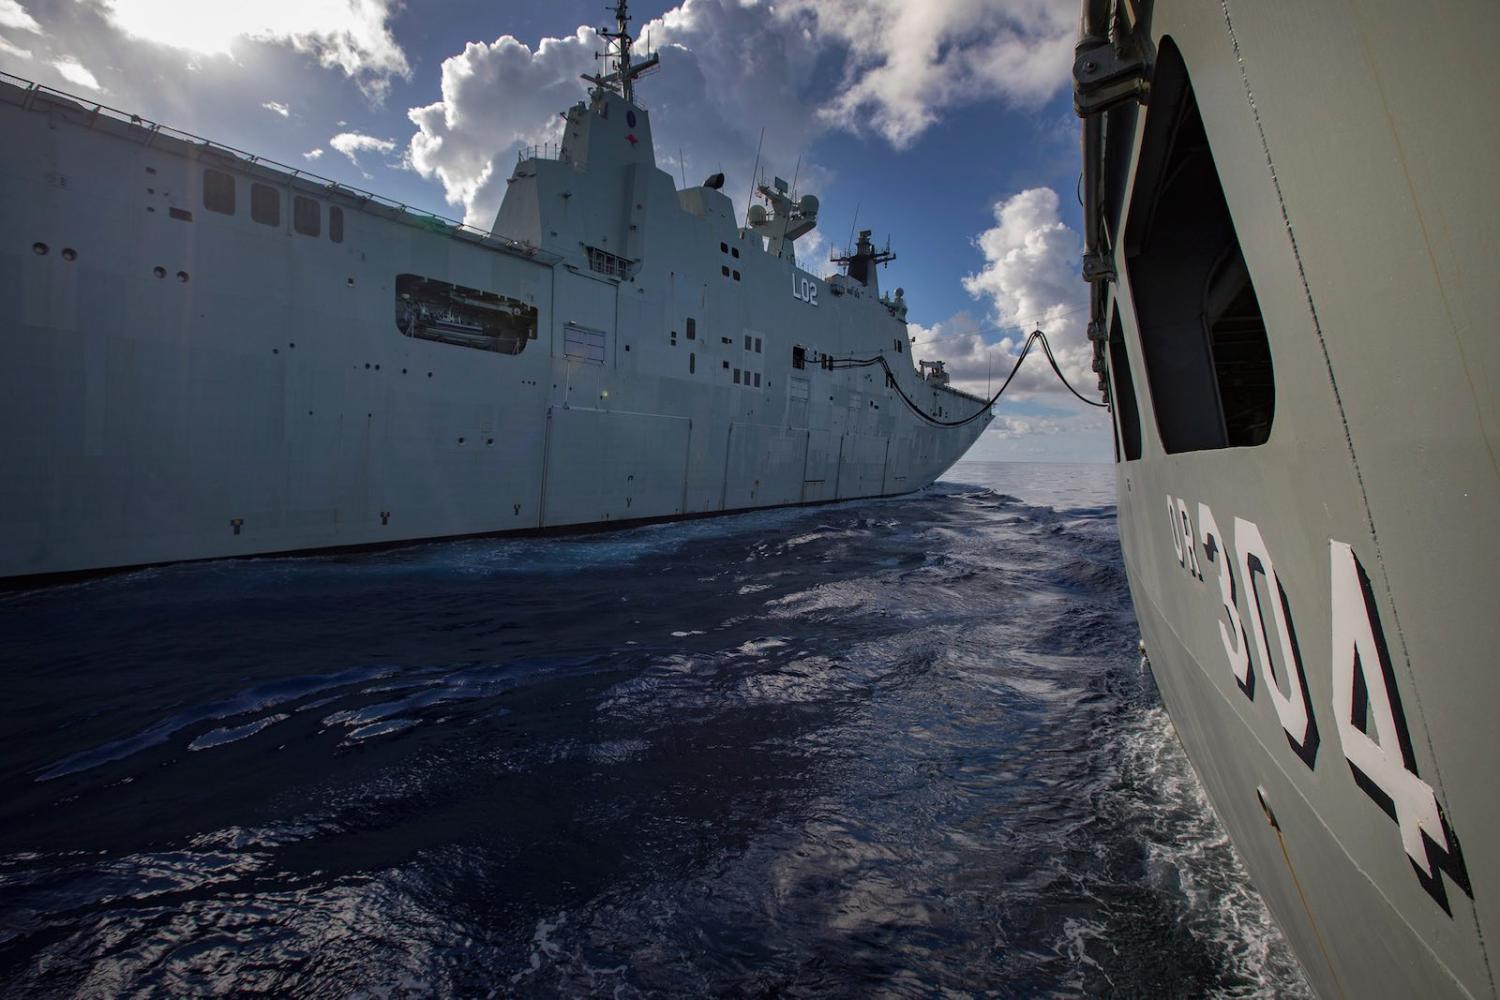 HMAS Canberra connects alongside HMAS Success during replenishment at sea (Photo: Defence Department)